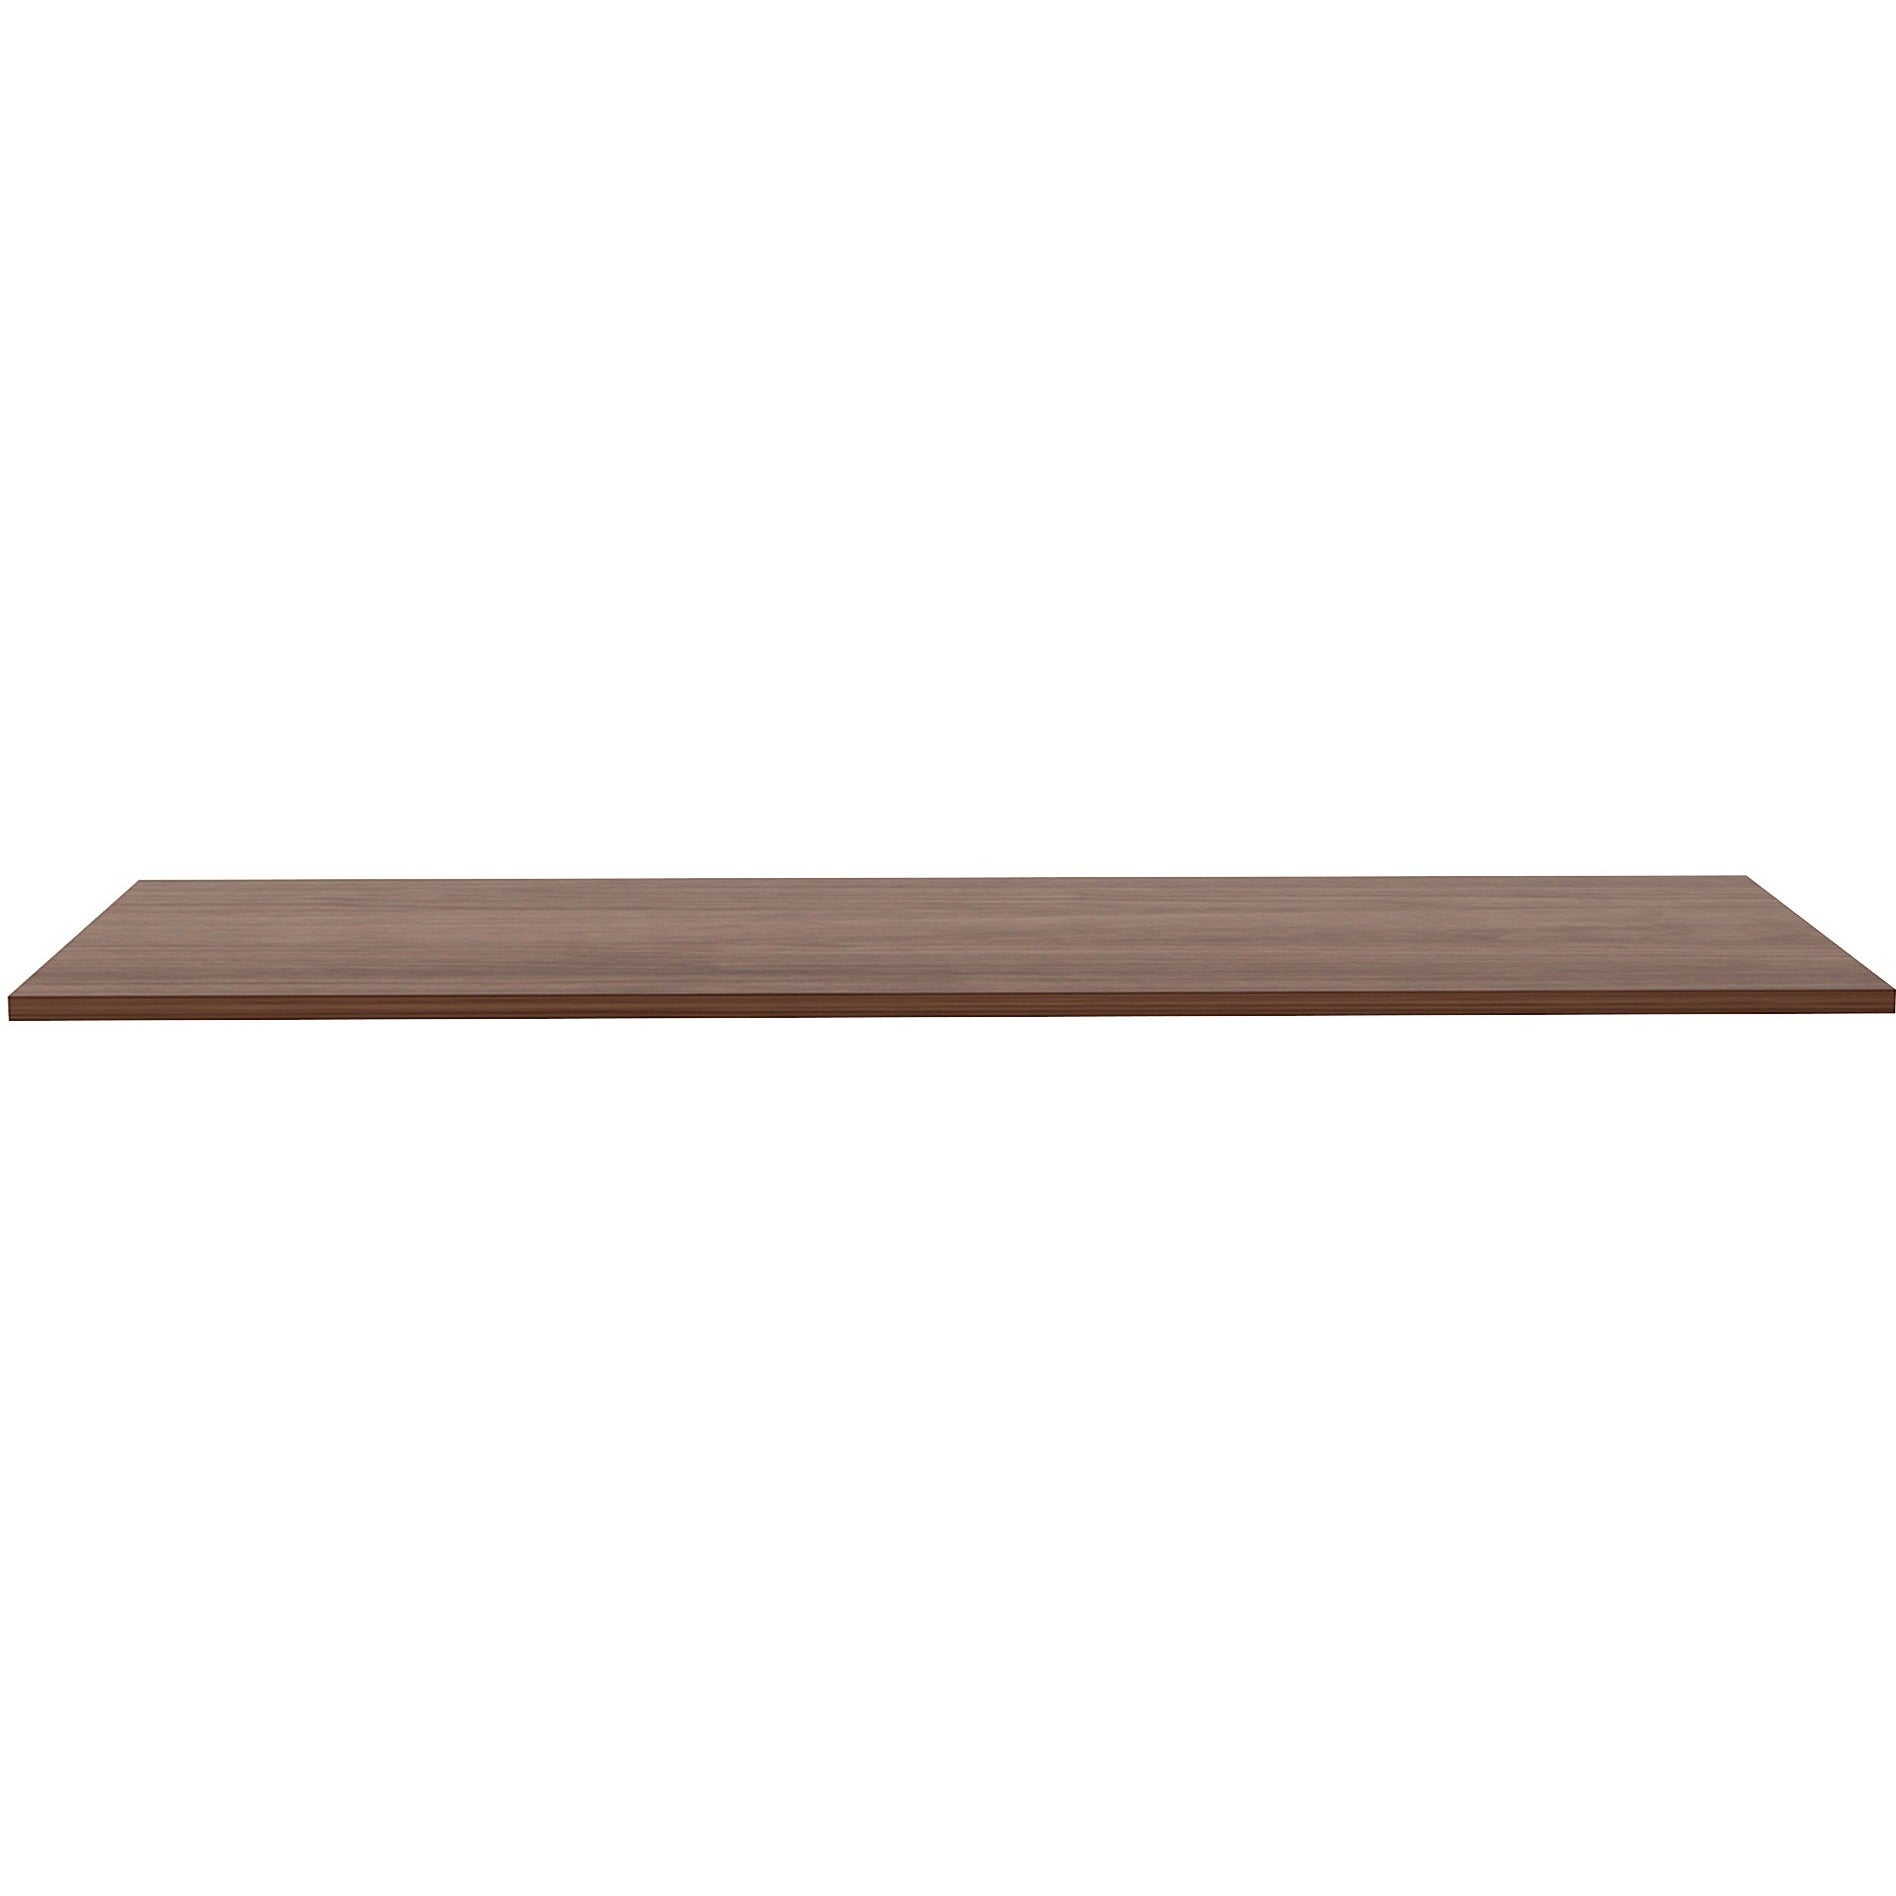 lorell-relevance-series-tabletop-for-table-topwalnut-rectangle-laminated-top-adjustable-height-x-24-table-top-width-x-72-table-top-depth-x-1-table-top-thickness-assembly-required-1-each_llr59632 - 2